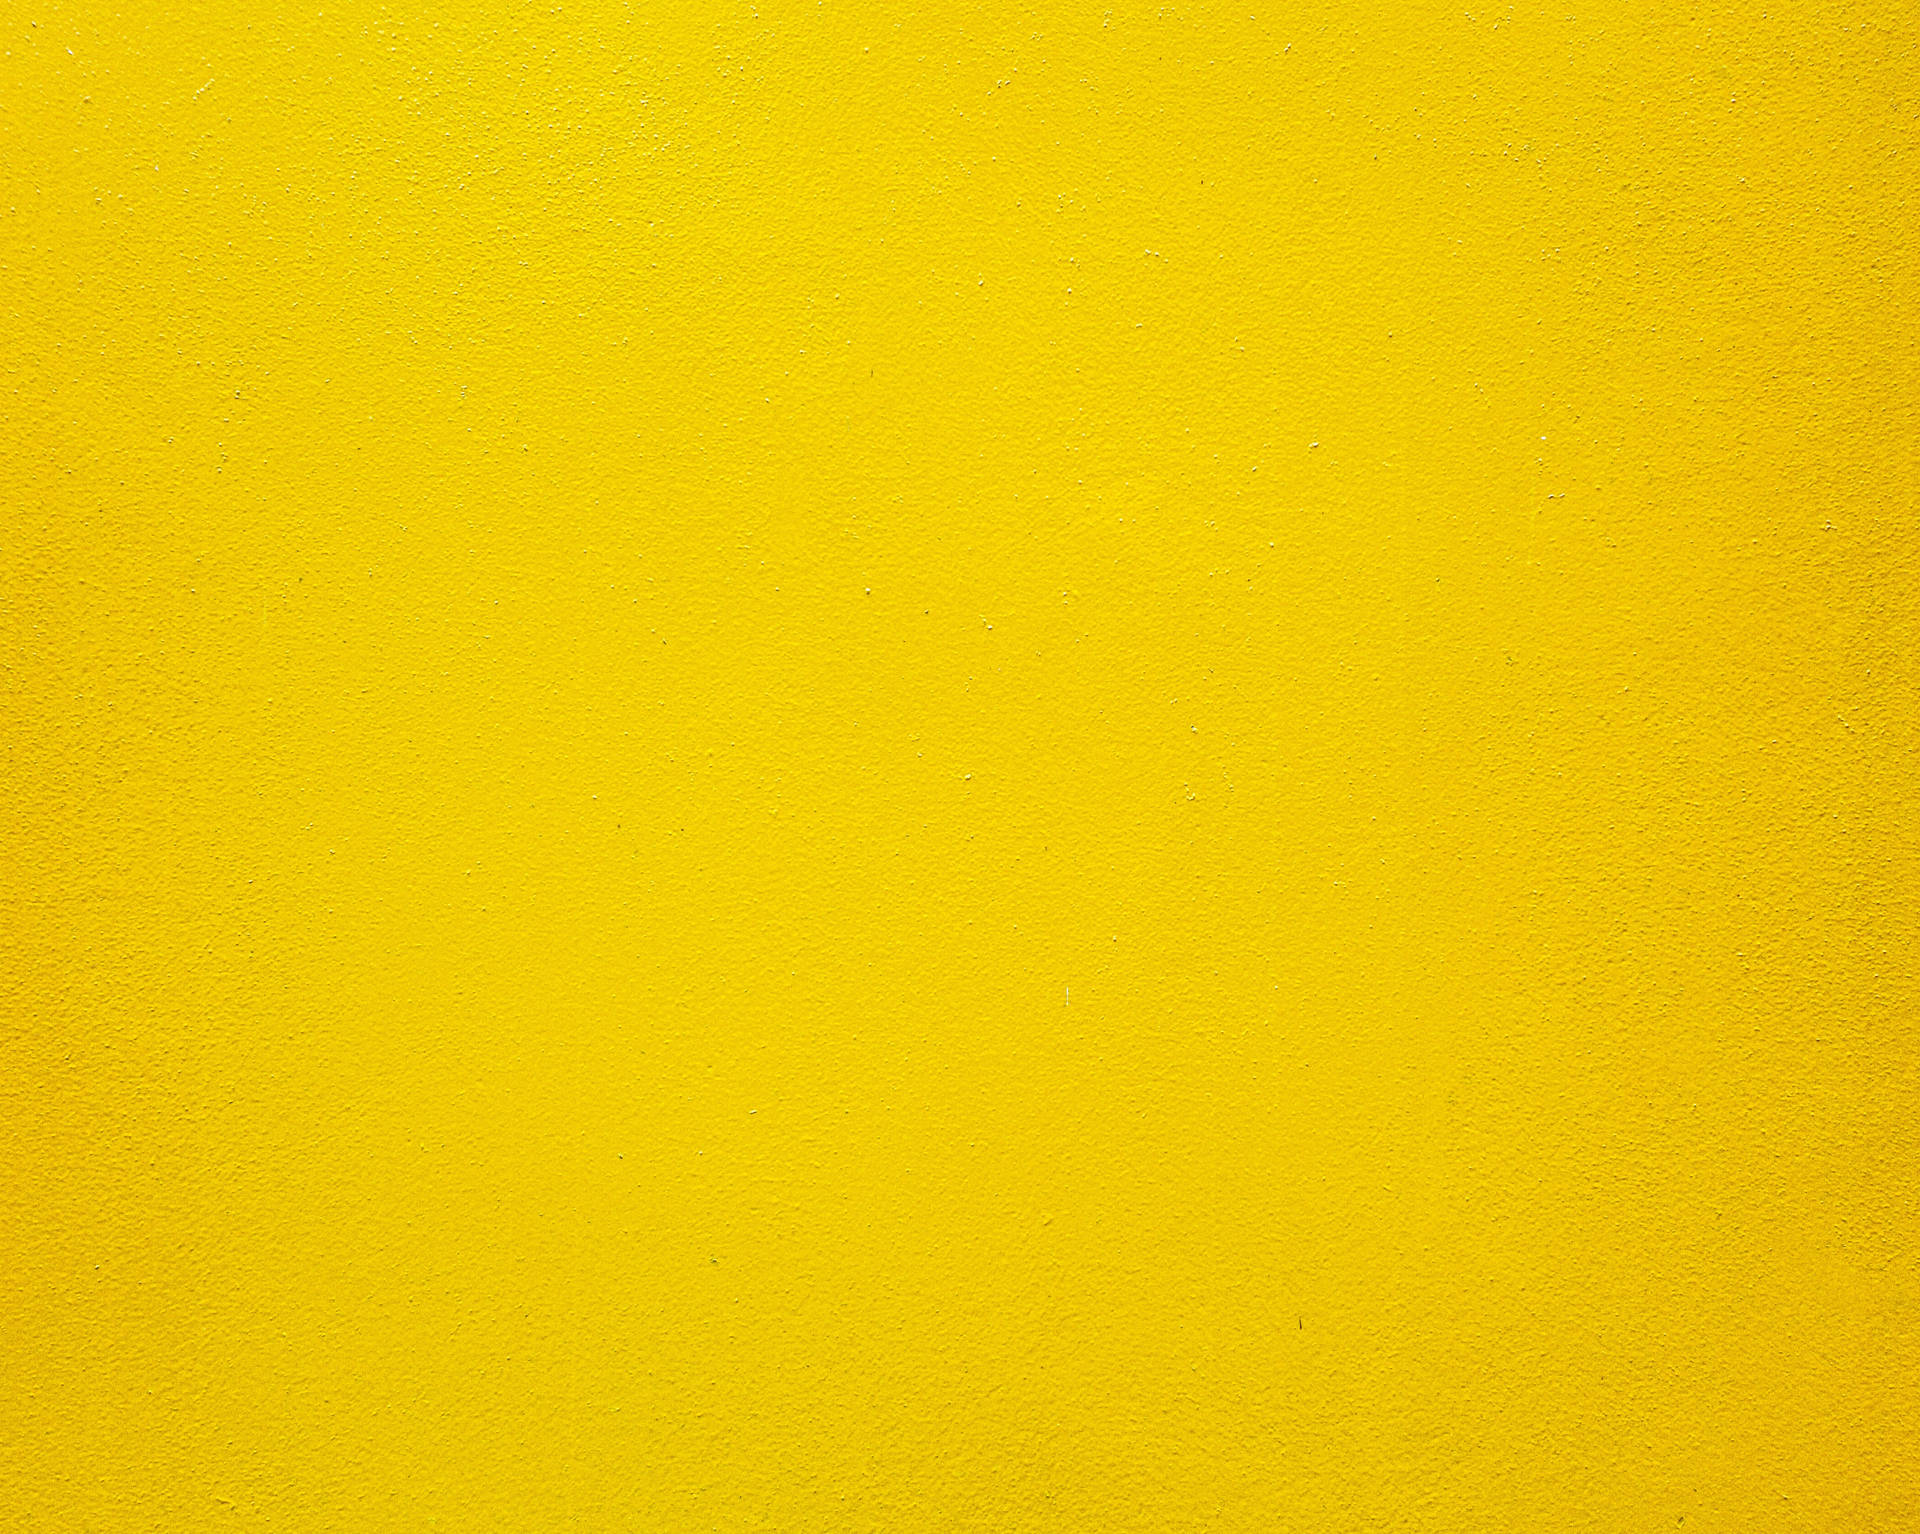 5007X4000 Yellow Wallpaper and Background